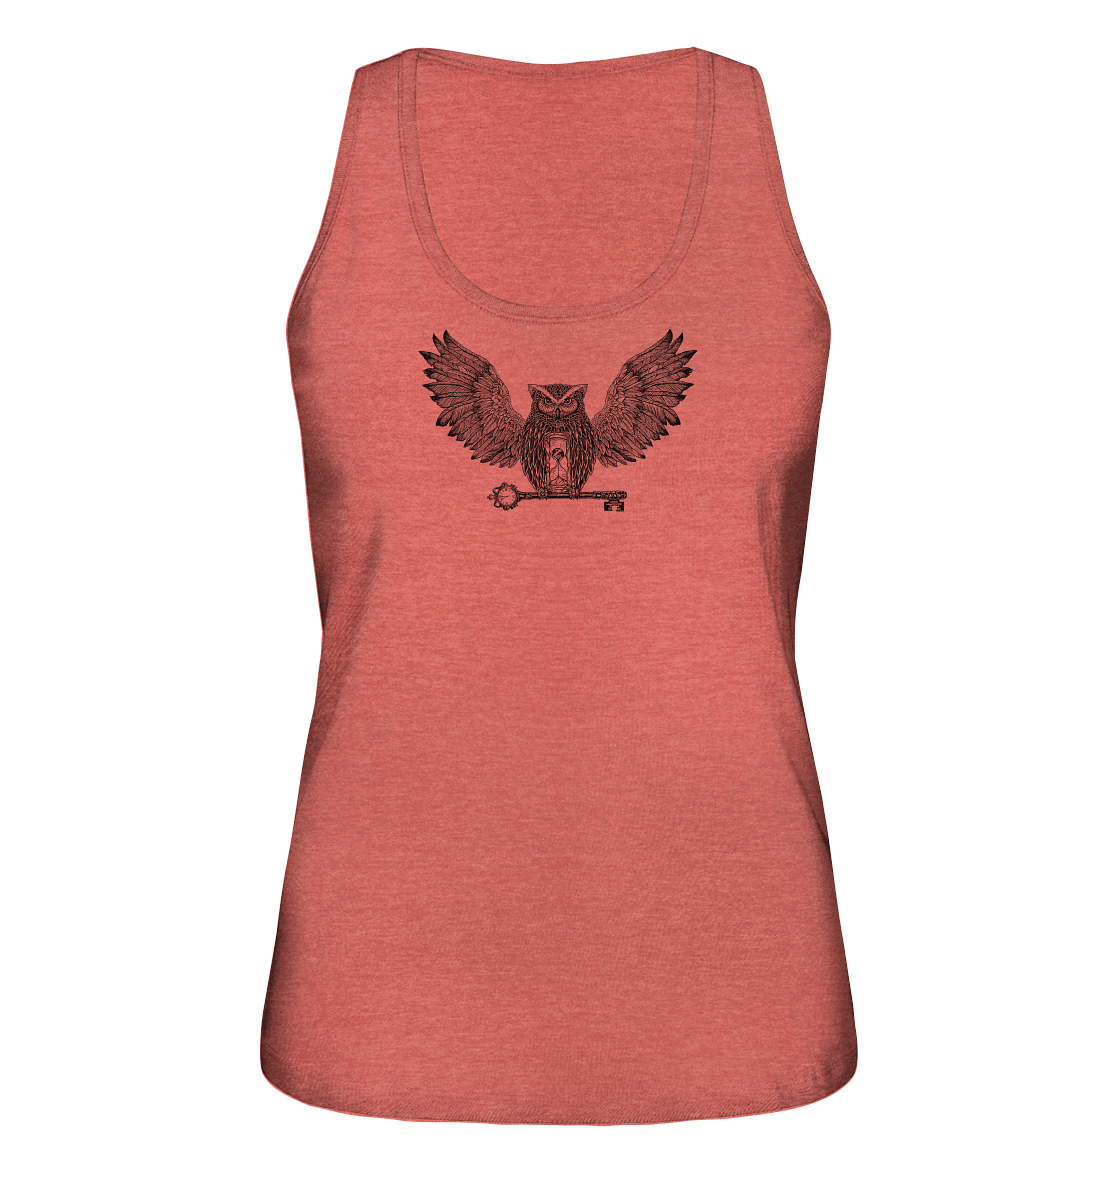 front-ladies-organic-tank-top-e05651-1116x-6.png